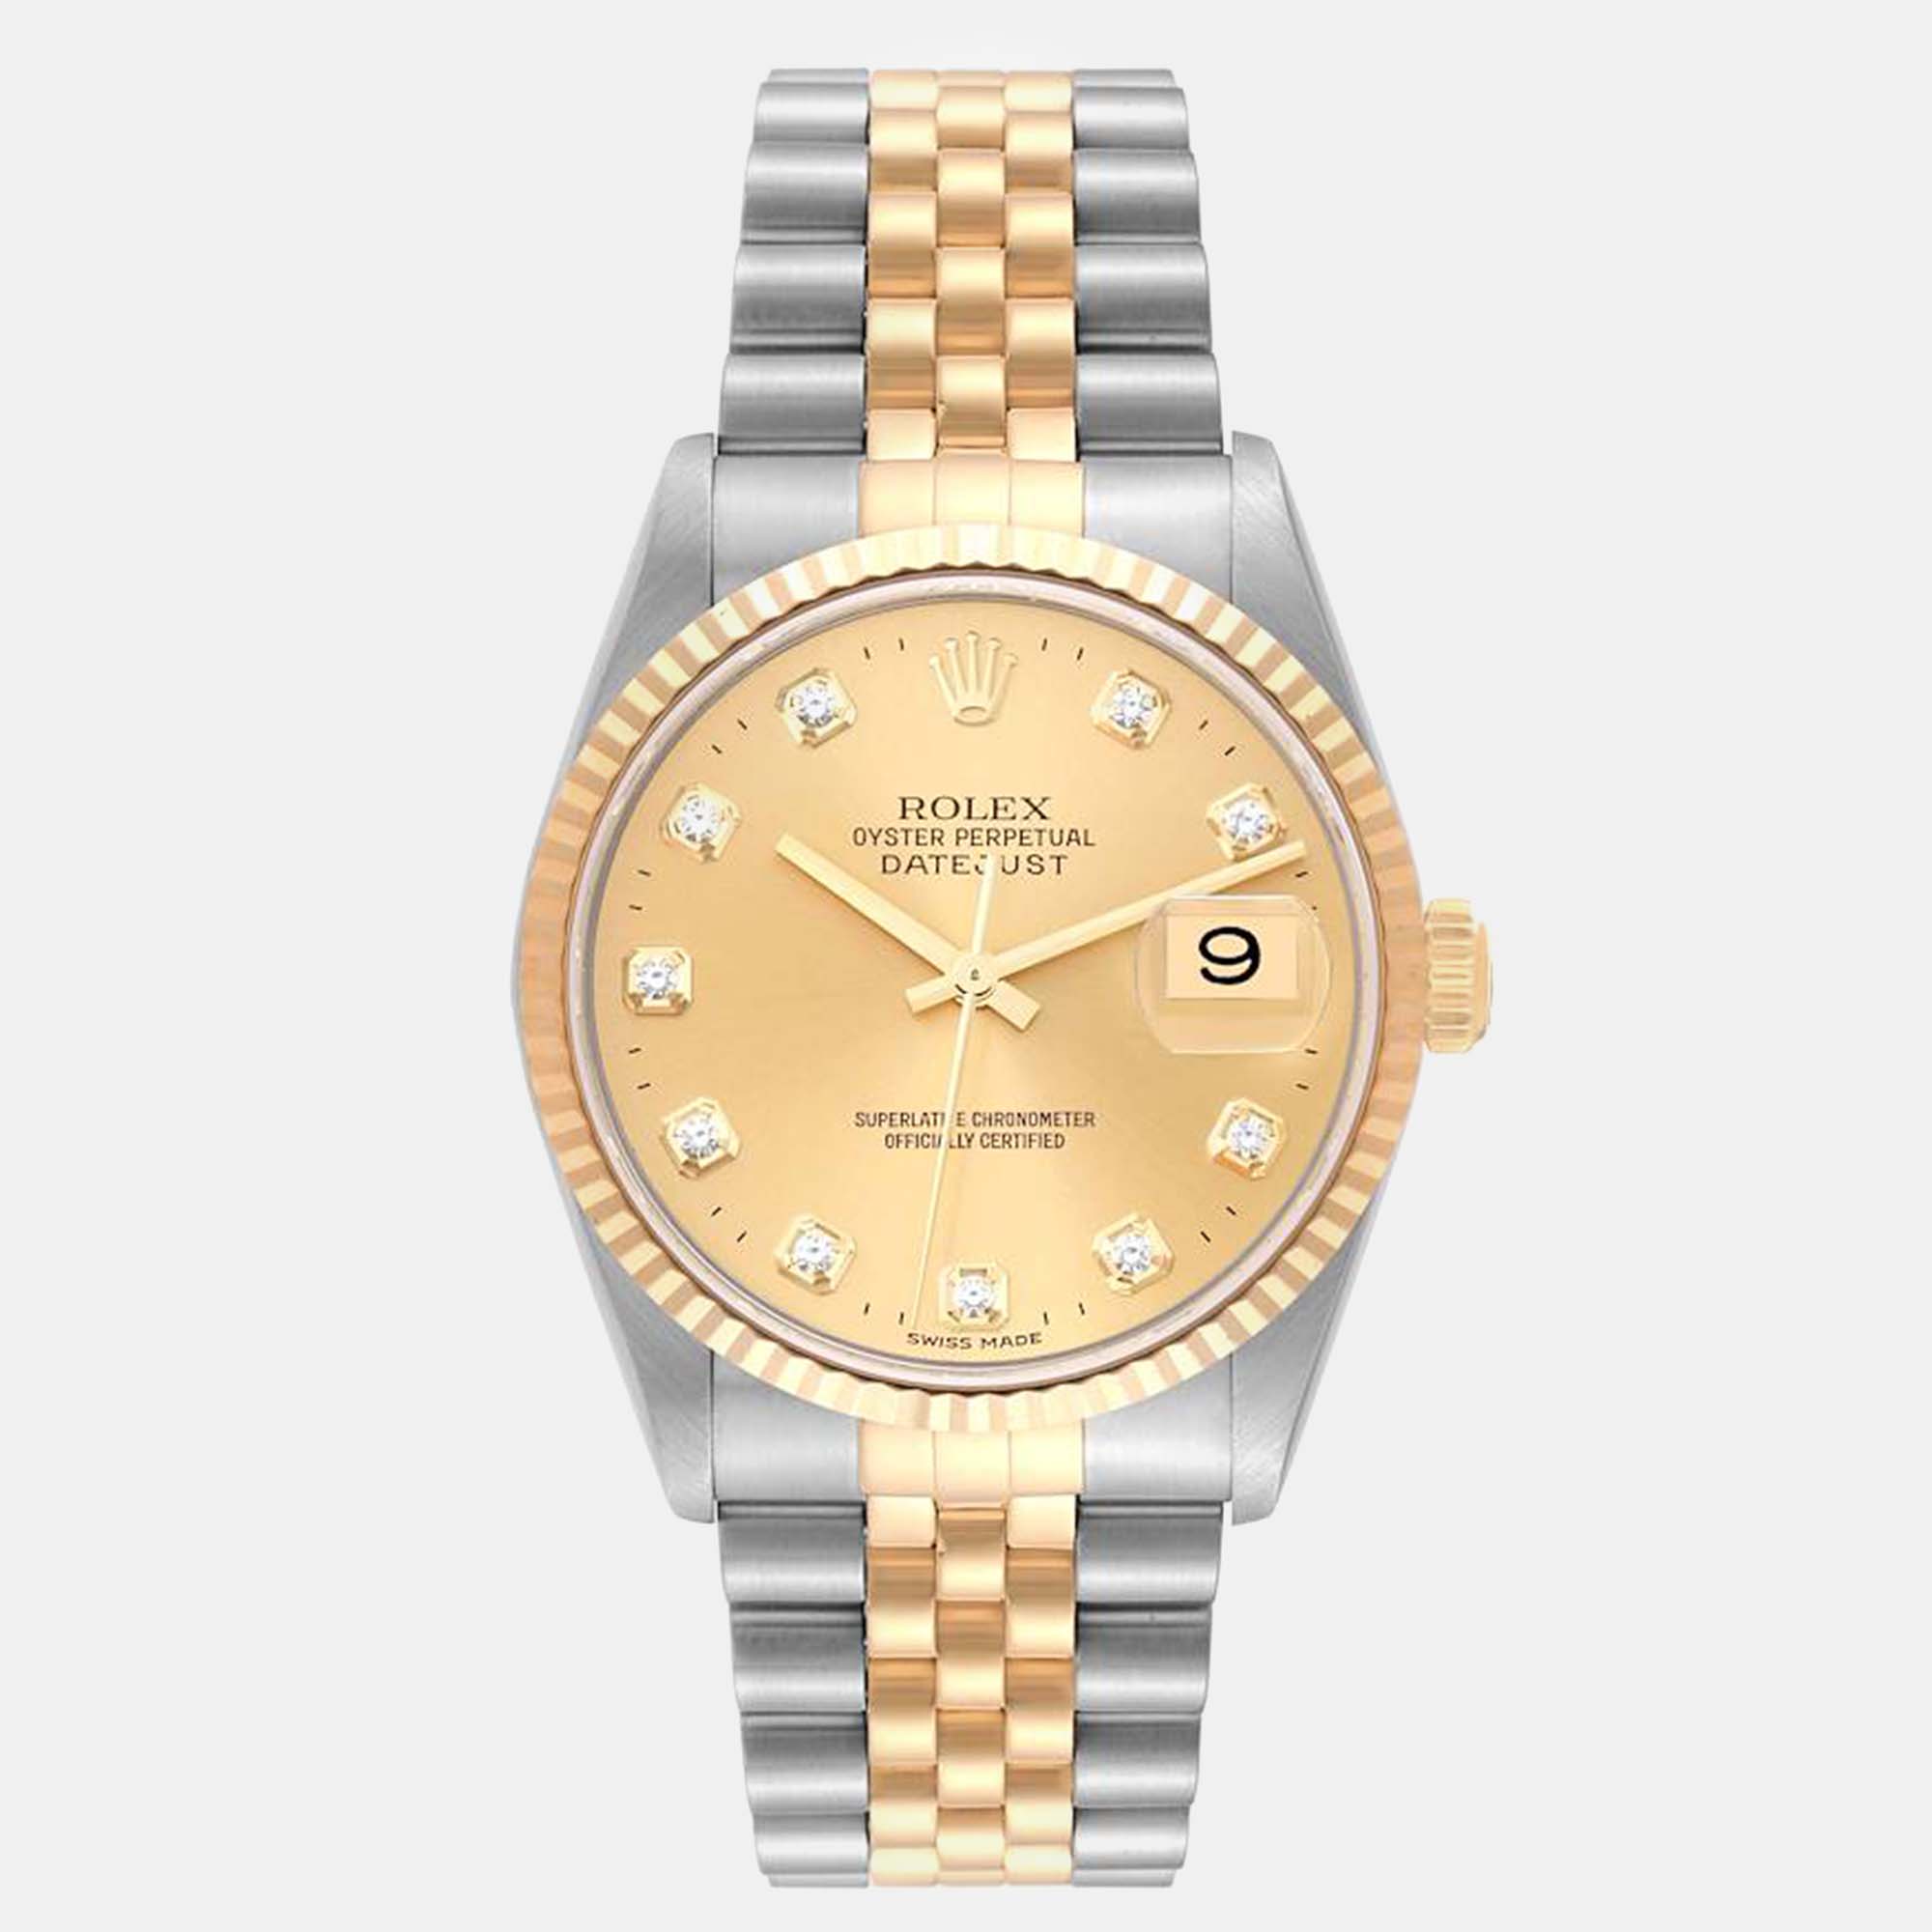 Pre-owned Rolex Datejust Champagne Diamond Dial Steel Yellow Gold Men's Watch 36 Mm